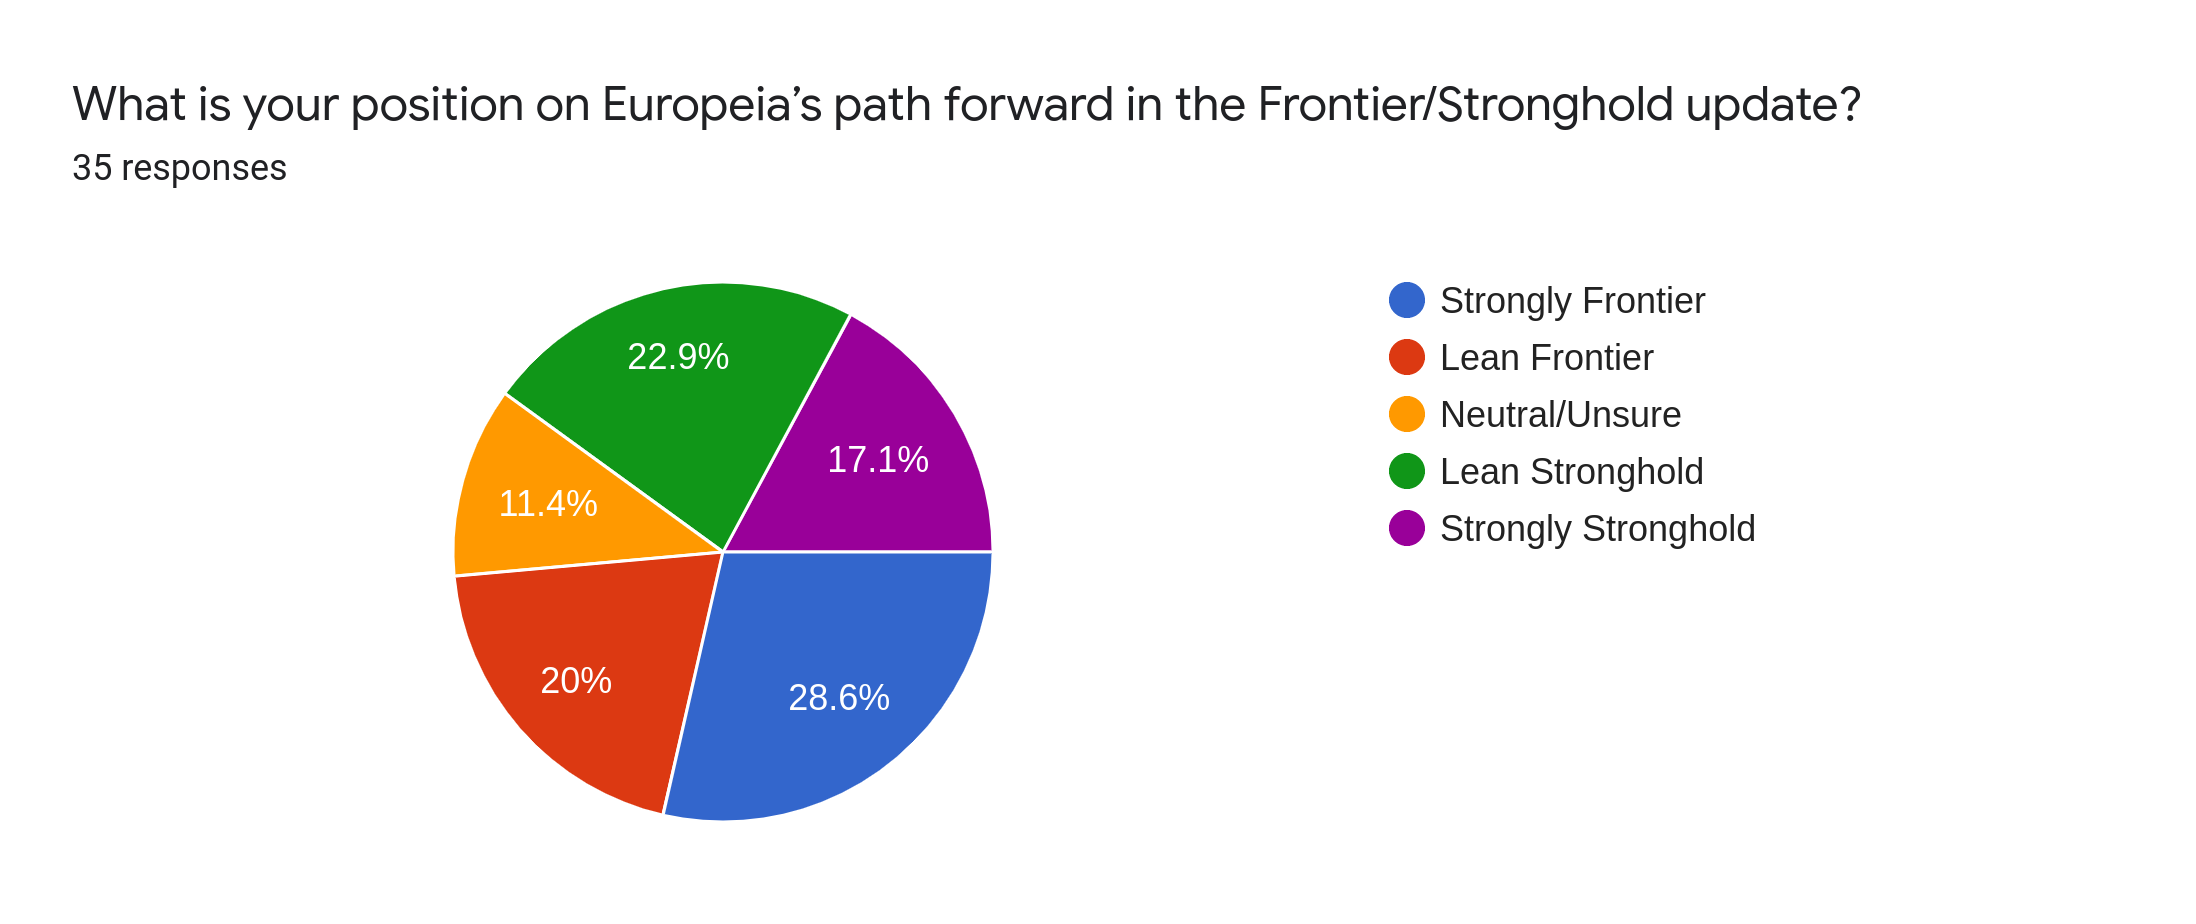 Forms response chart. Question title: What is your position on Europeia’s path forward in the Frontier/Stronghold update?. Number of responses: 35 responses.